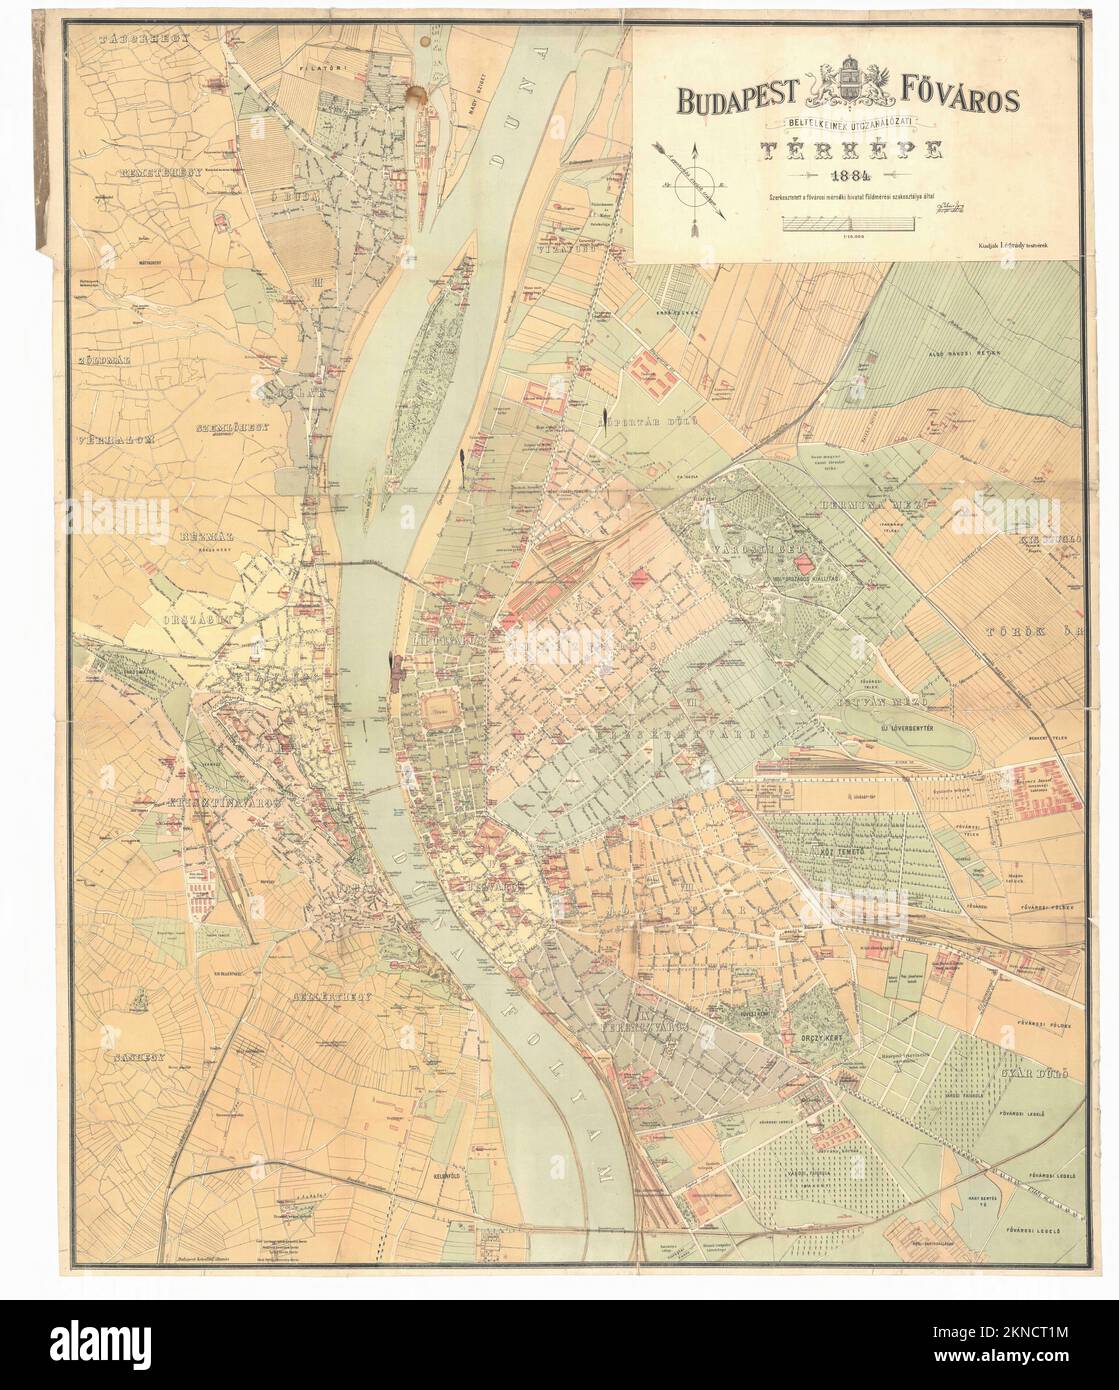 Vintage city plan of Budapest and area around it from 19th century. Maps are beautifully hand illustrated and engraved showing it at the time. Stock Photo